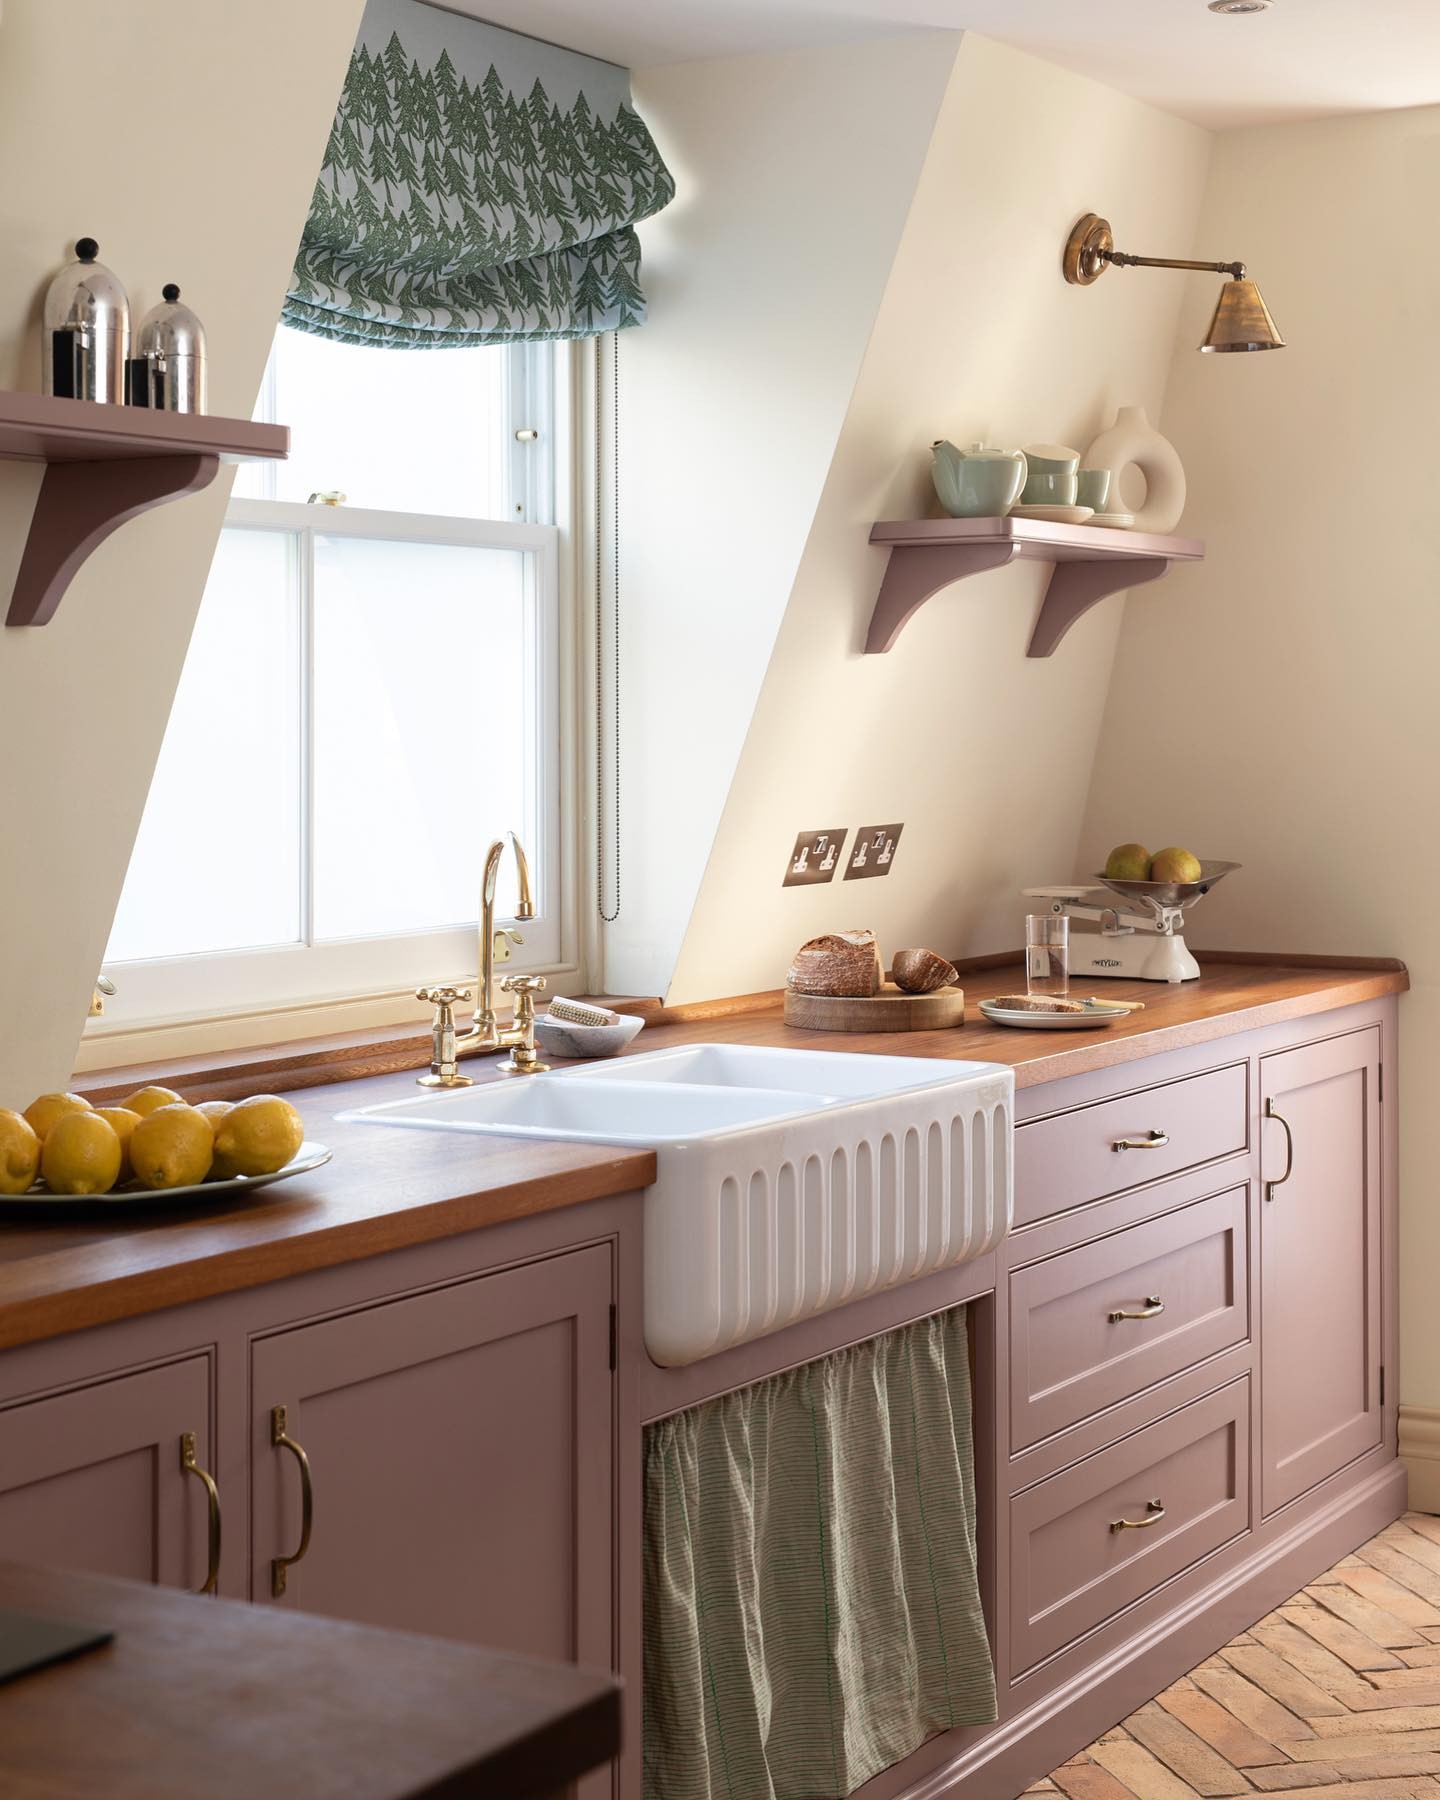 Traditional kitchen with cabinets painted in sulking room pink and walls in new white by farrow and ball